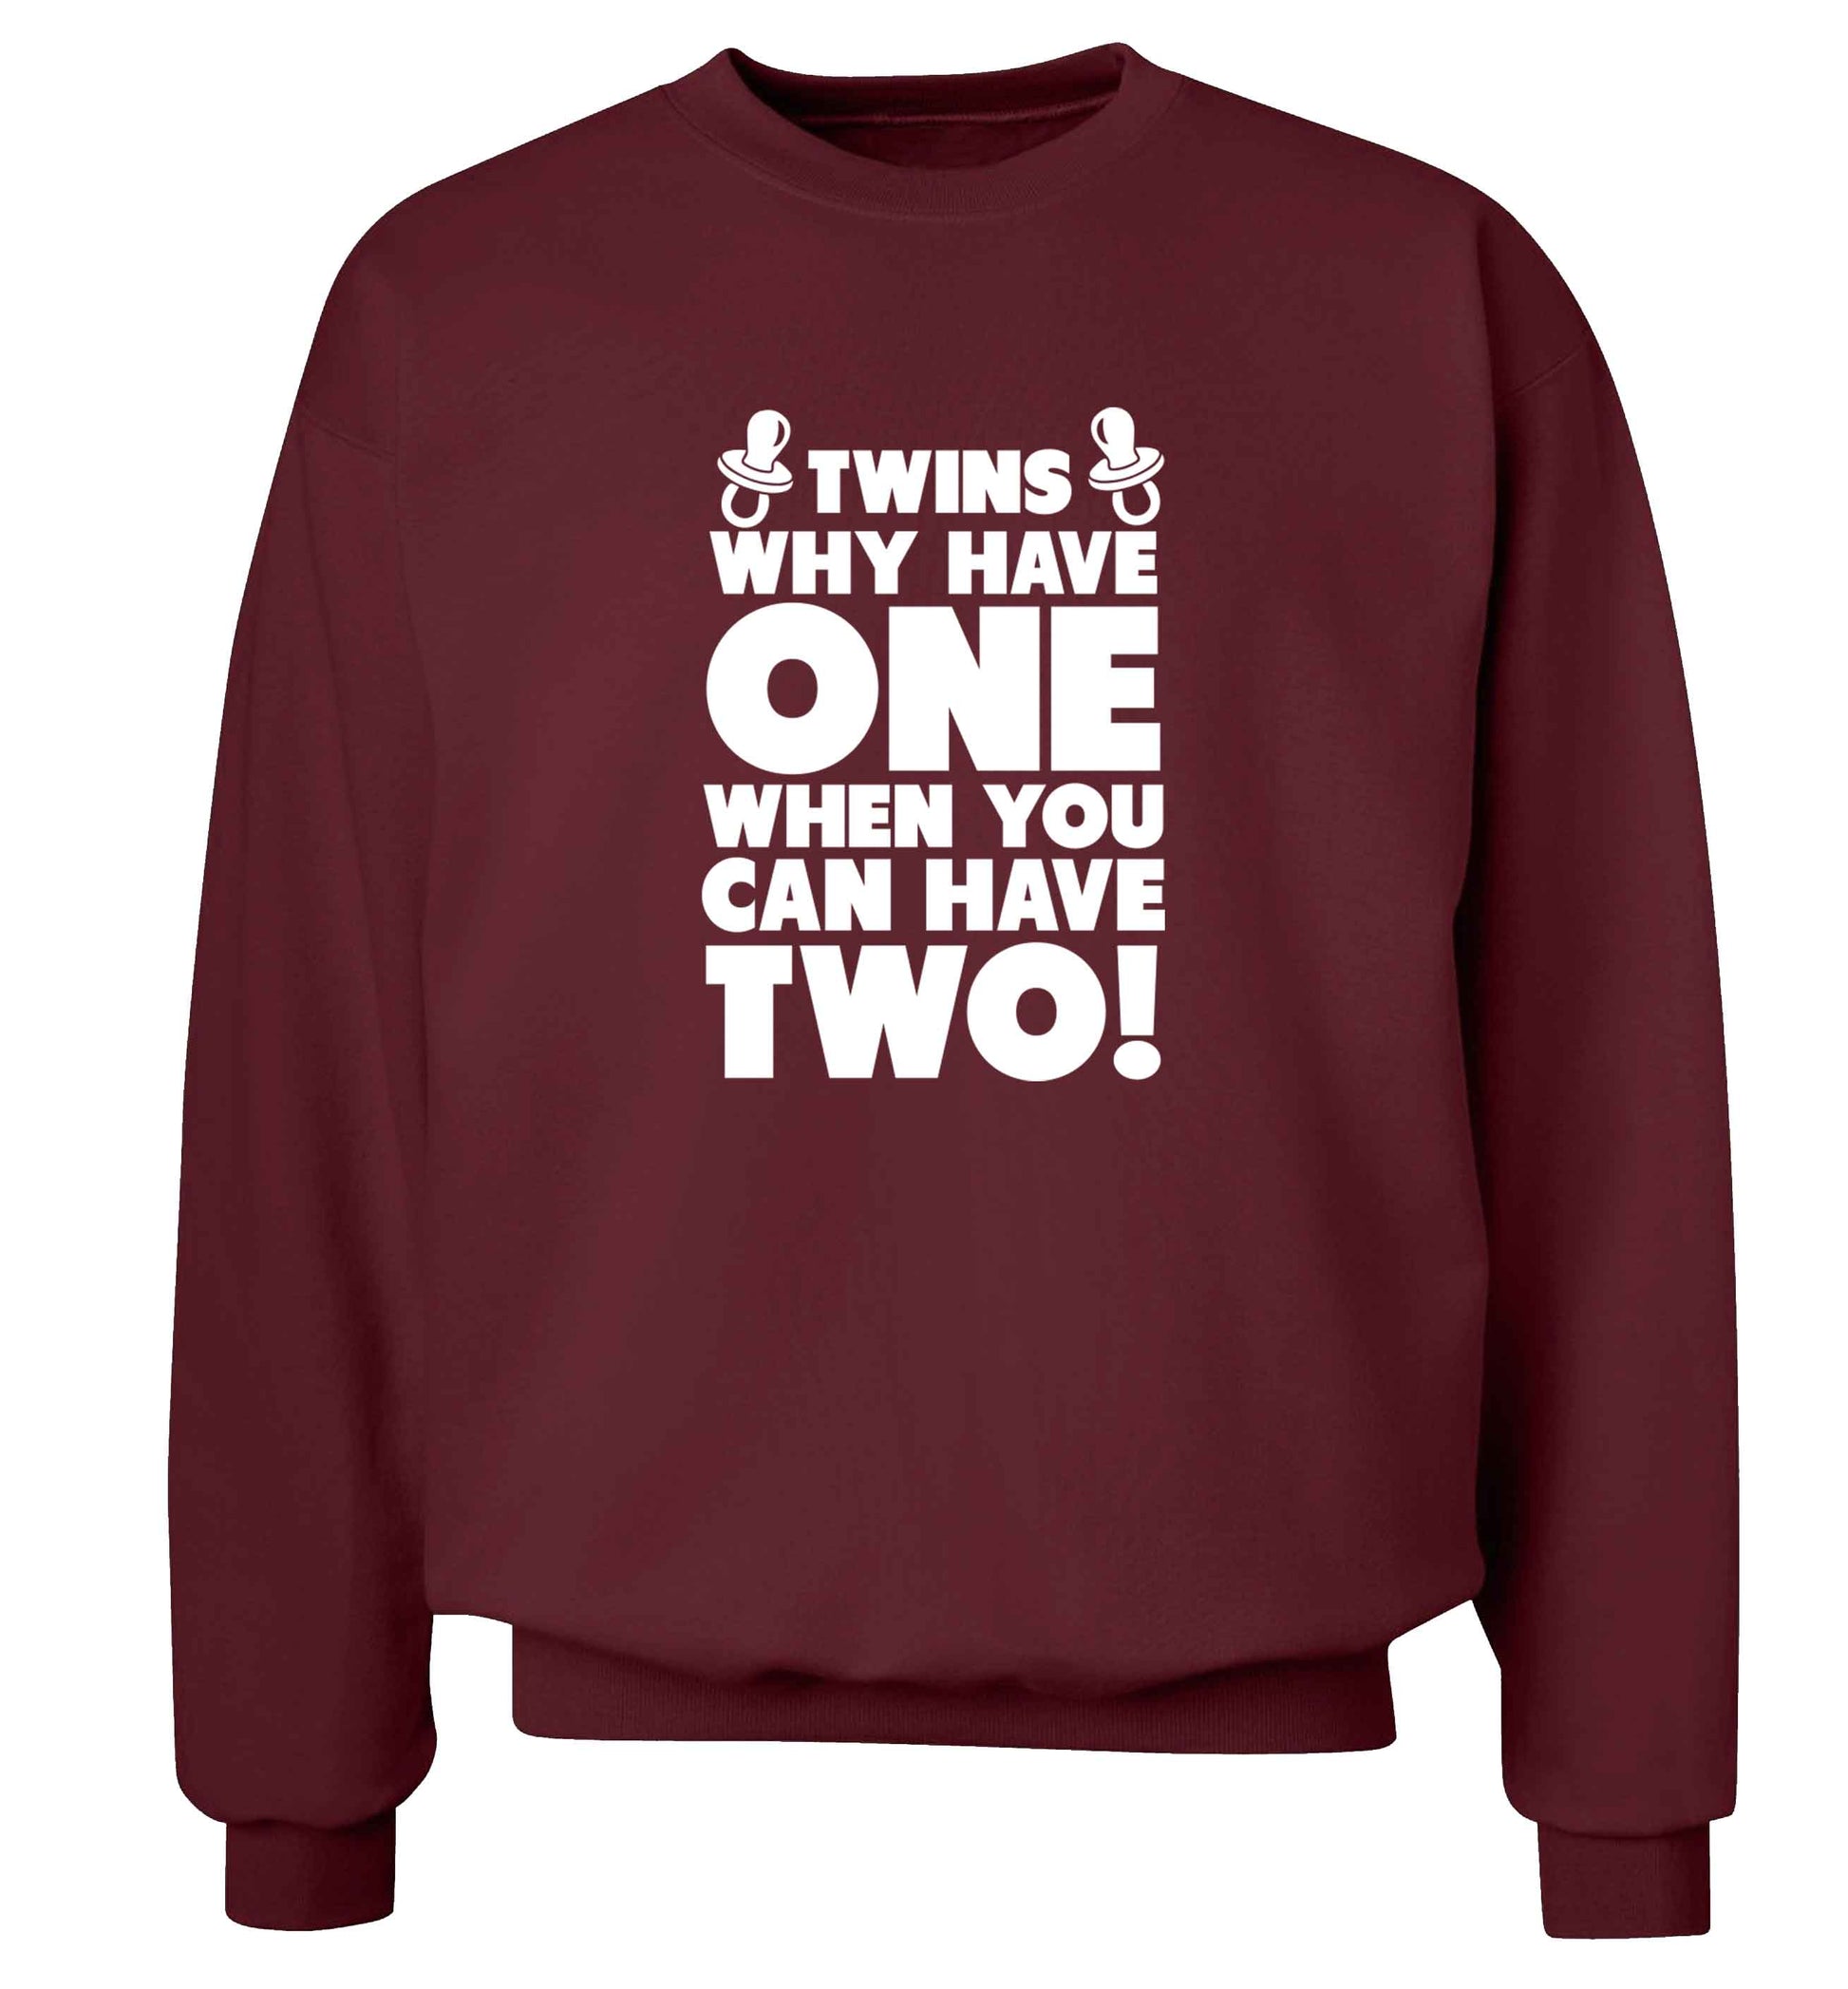 Twins why have one when you can have two adult's unisex maroon sweater 2XL